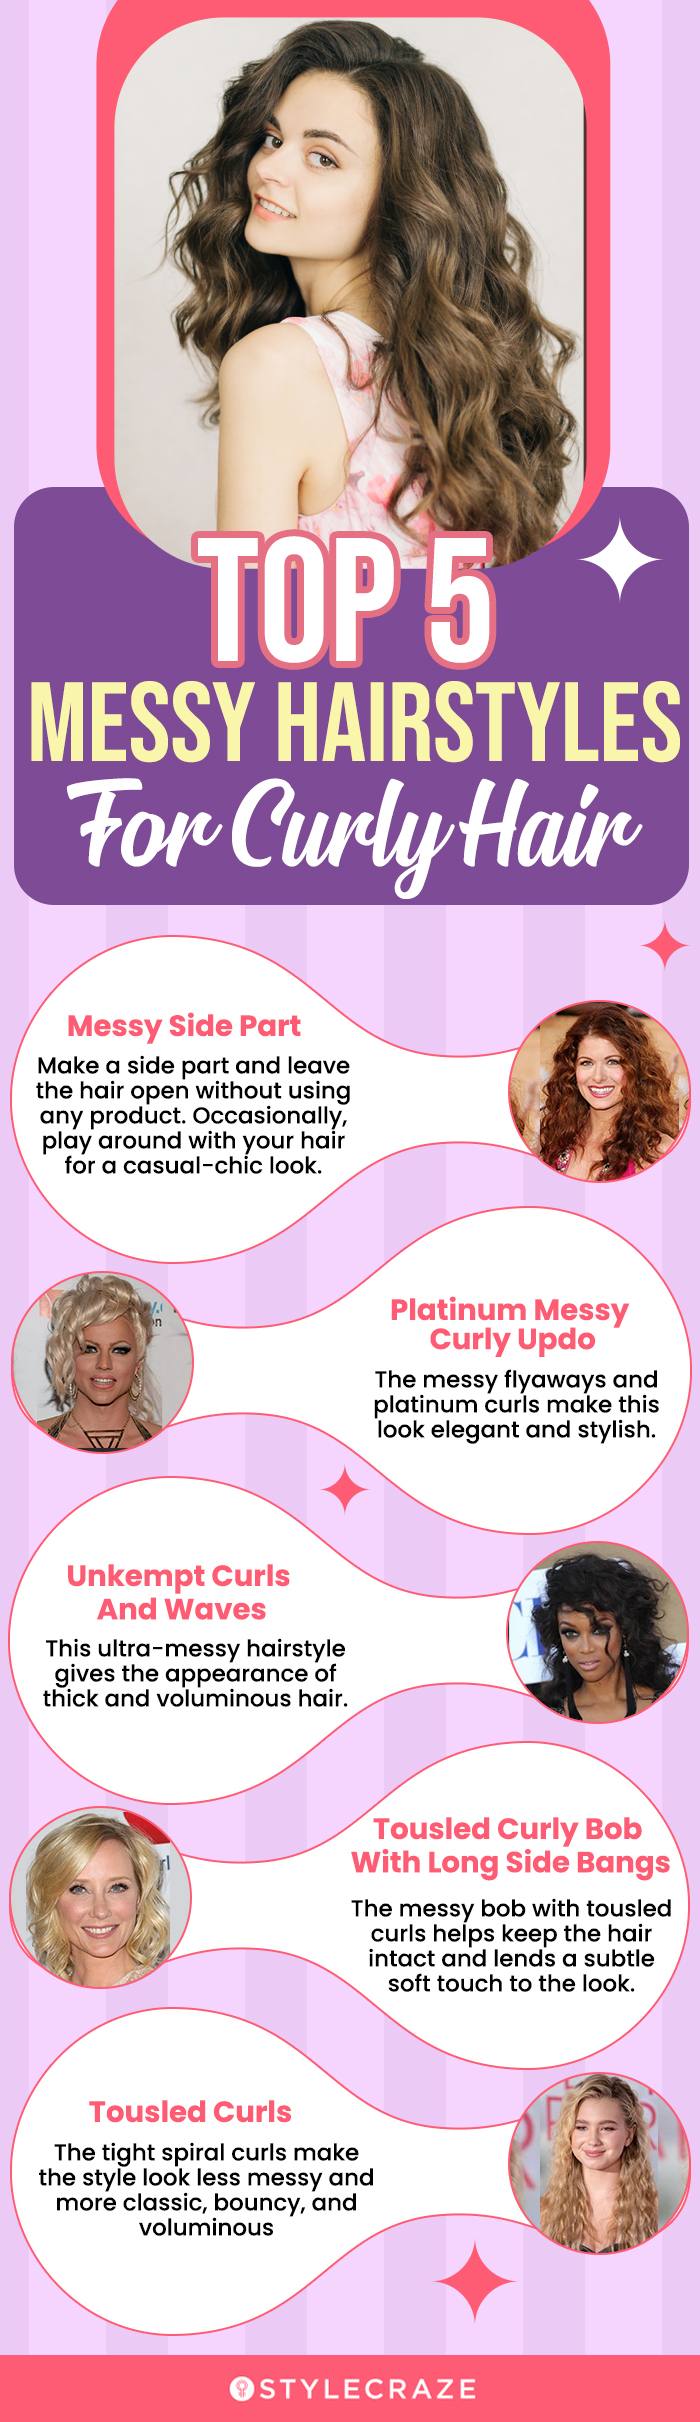 top 5 messy hairstyles for curly hair (infographic)